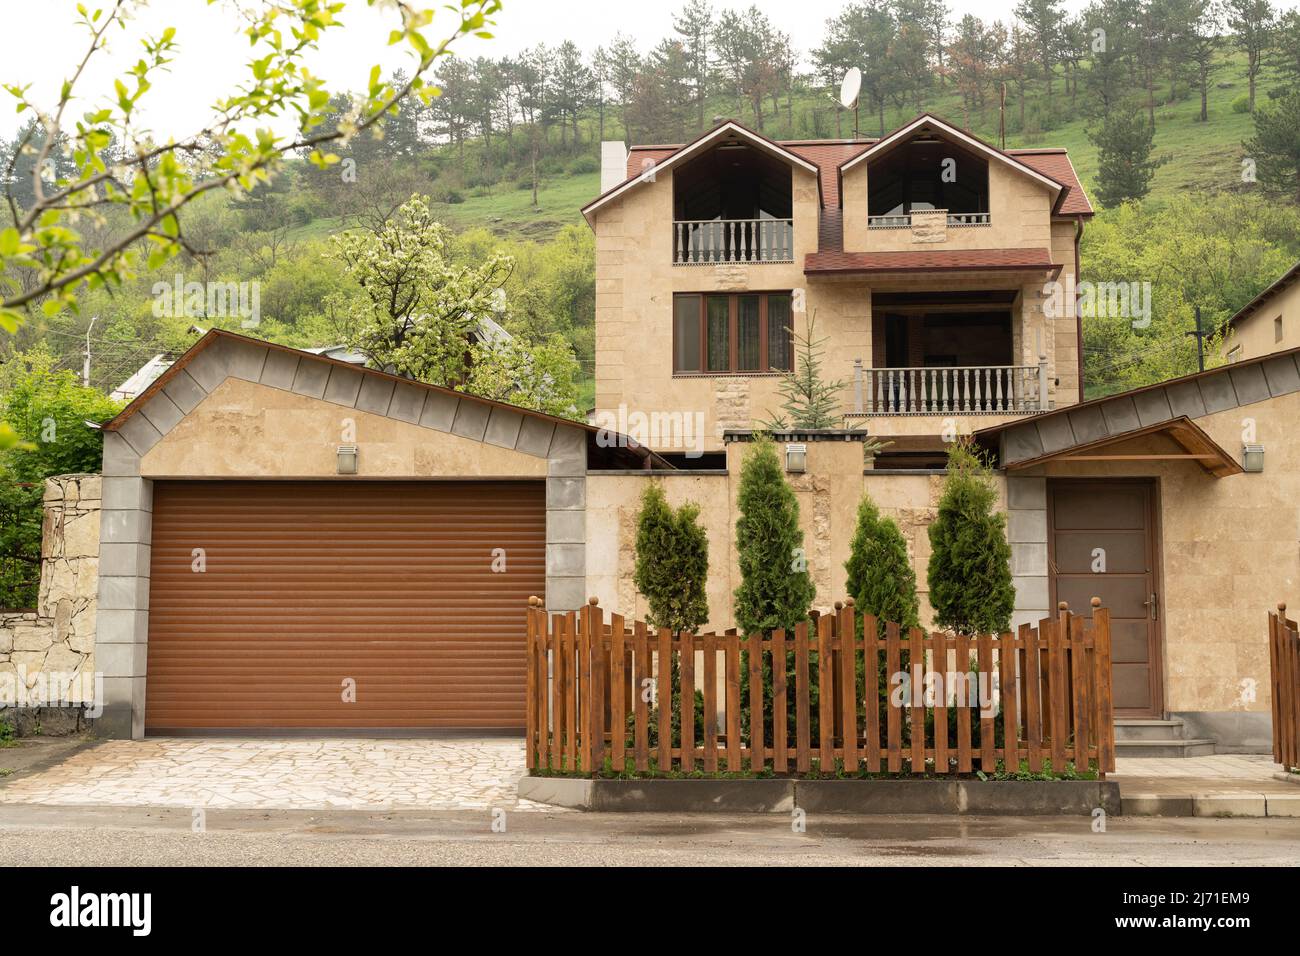 Dilijan, Armenia - May 5, 2022 - Clean and modern styel yellow stone house with high front yard fence in Dilijan, Armenia Stock Photo